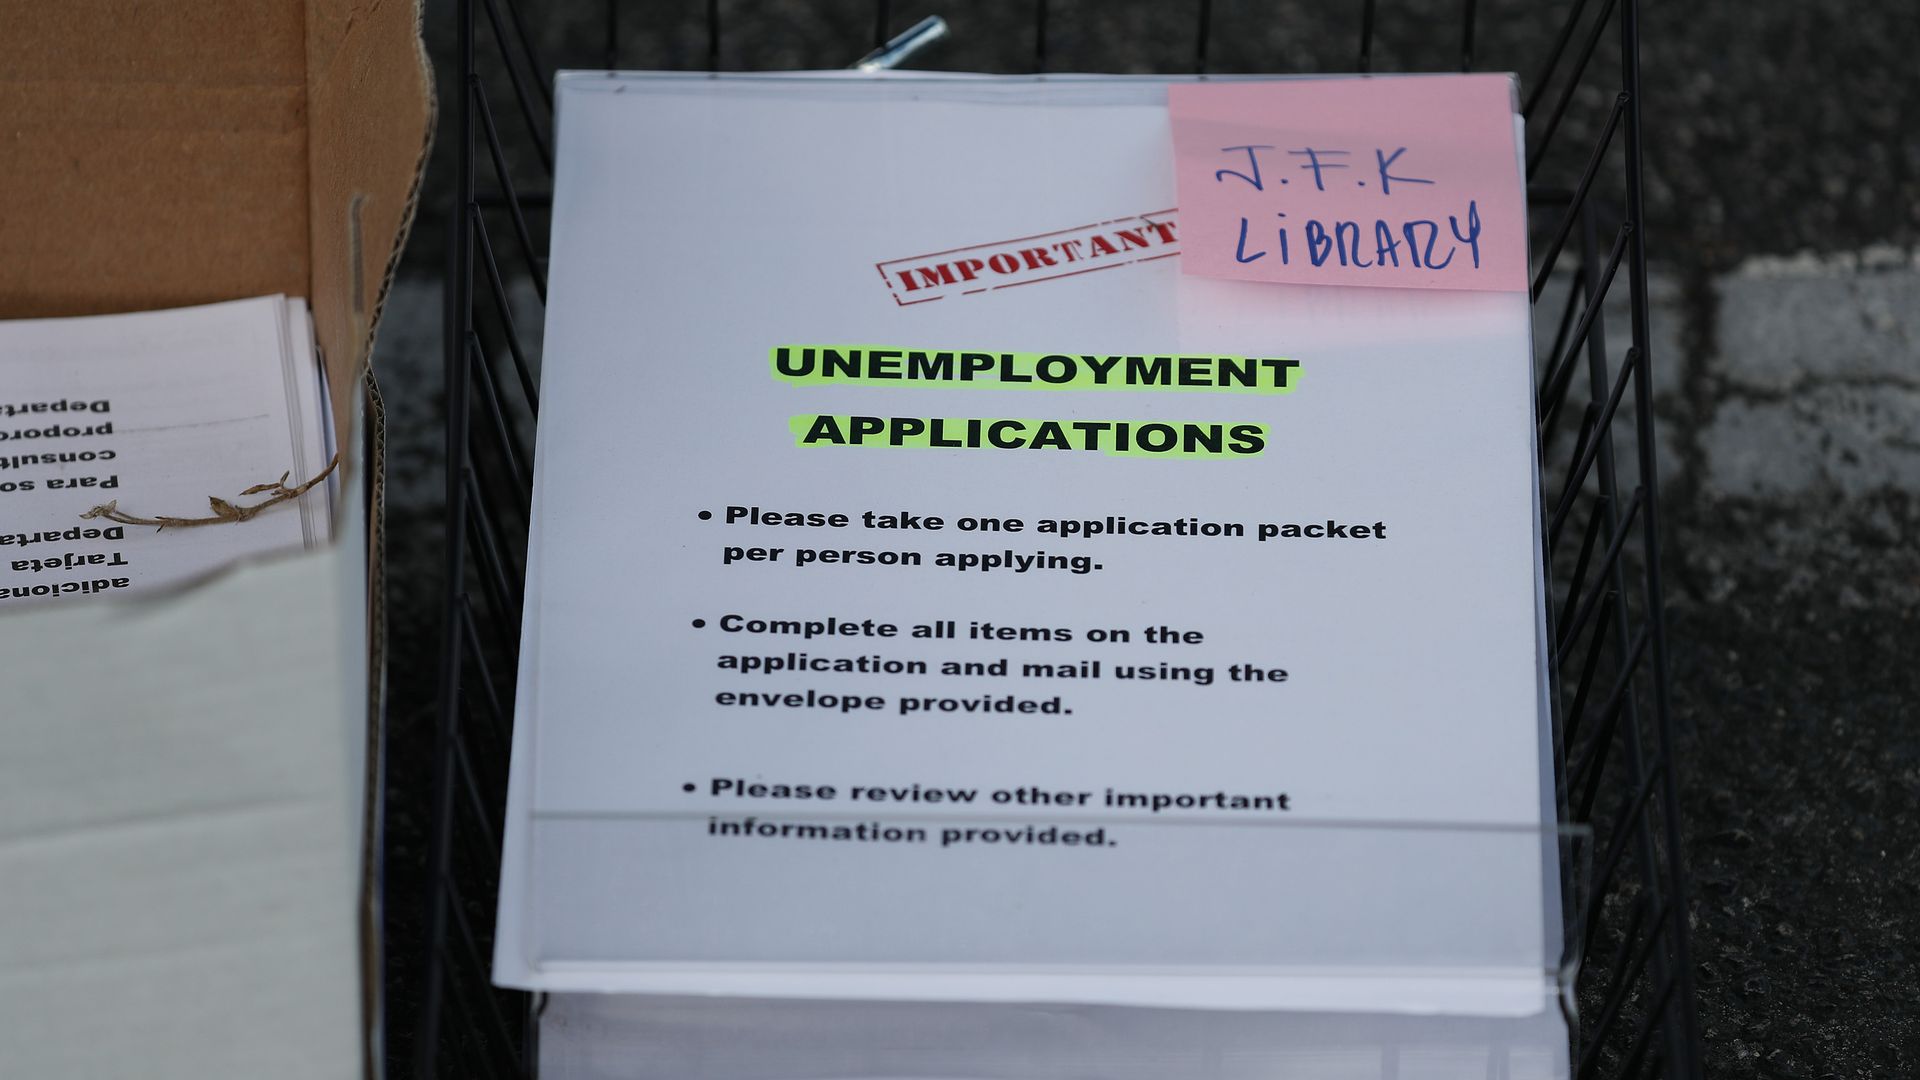 Unemployment applications are seen as Hialeah, Florida, employees hand them out to people in front of a library.